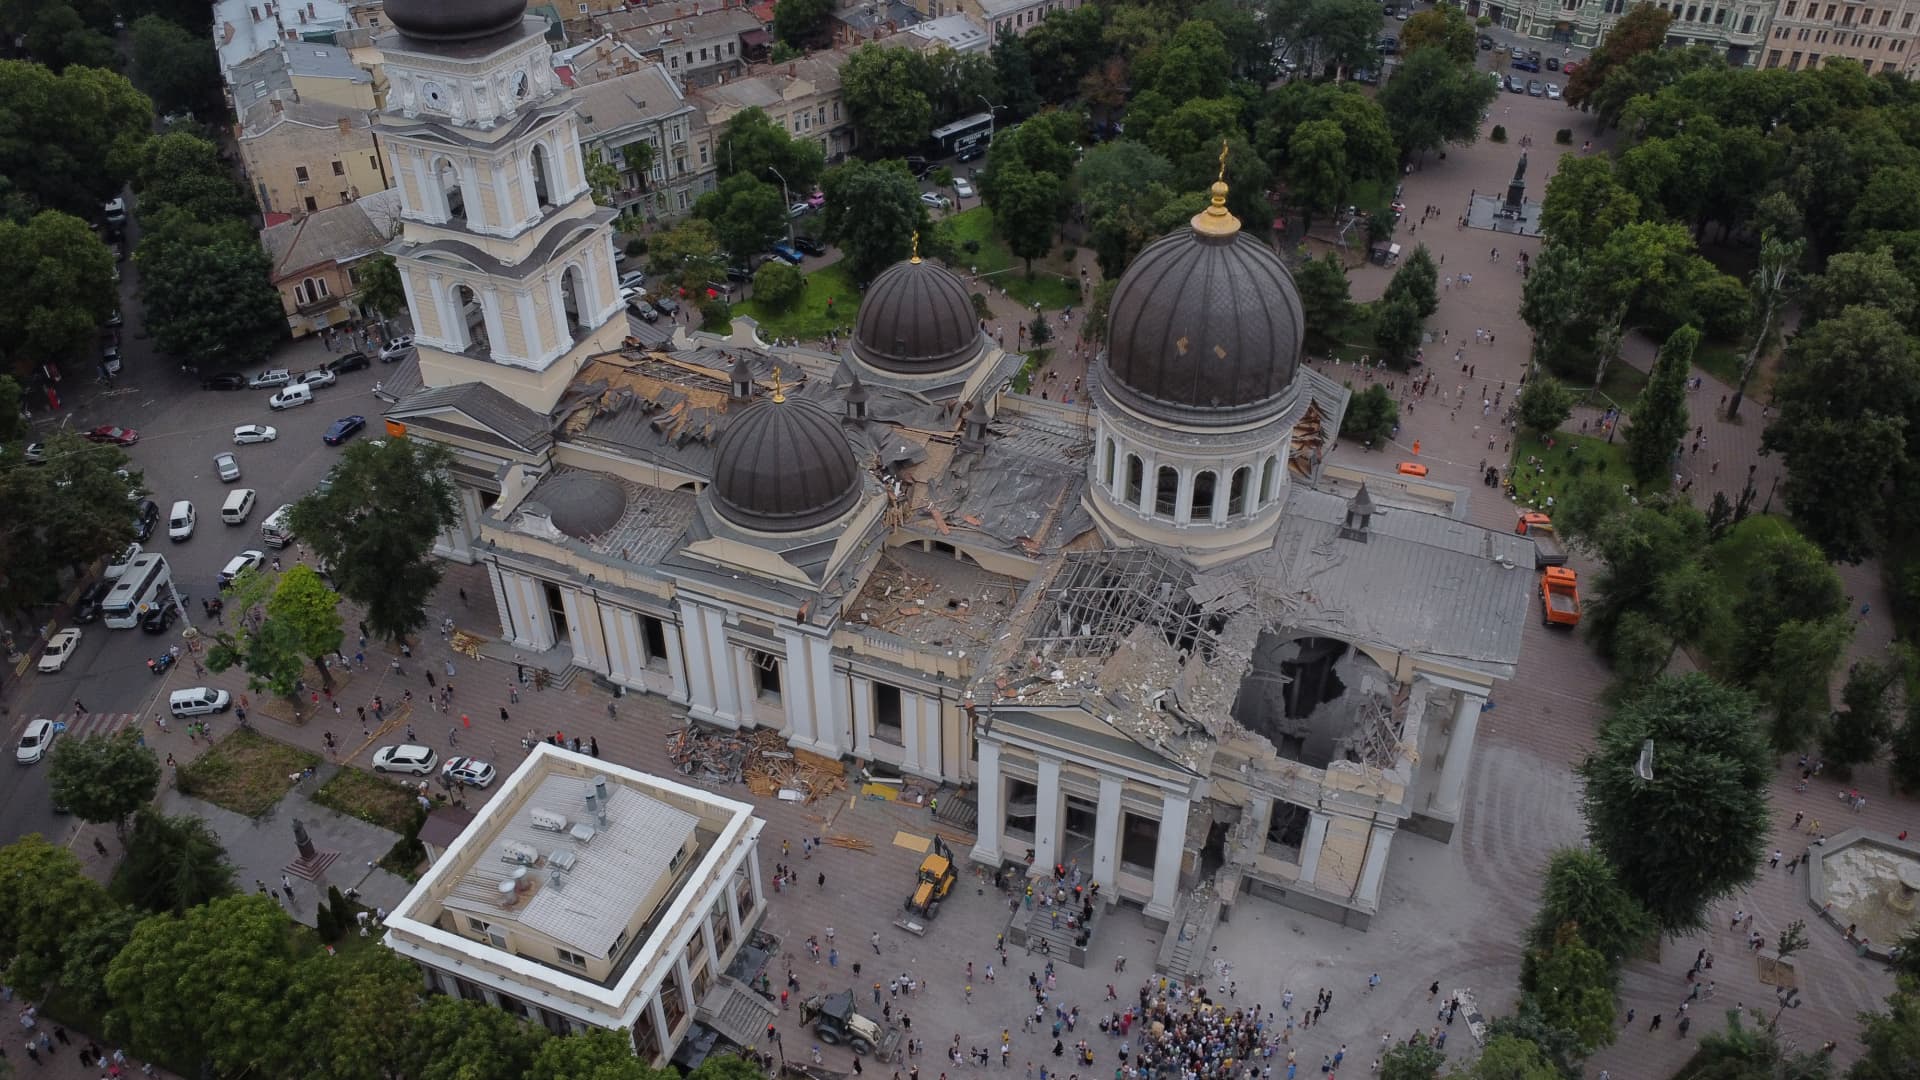 In an aerial view, the Transfiguration Cathedral heavily damaged by Russian missile on July 23, 2023 in Odesa, Ukraine. The Russian missile broke through the roof the main Orthodox cathedral of the city, and a fire started. As a result of the Russian shelling, several cultural buildings were damaged in the center of Odessa, where the World Heritage site “Historic Centre of Odesa” is located. Under an emergency procedure in January 2023, UNESCO added it to both the World Heritage List and the List of World Heritage in Danger. (Photo by Yan Dobronosov/Global Images Ukraine via Getty Images)